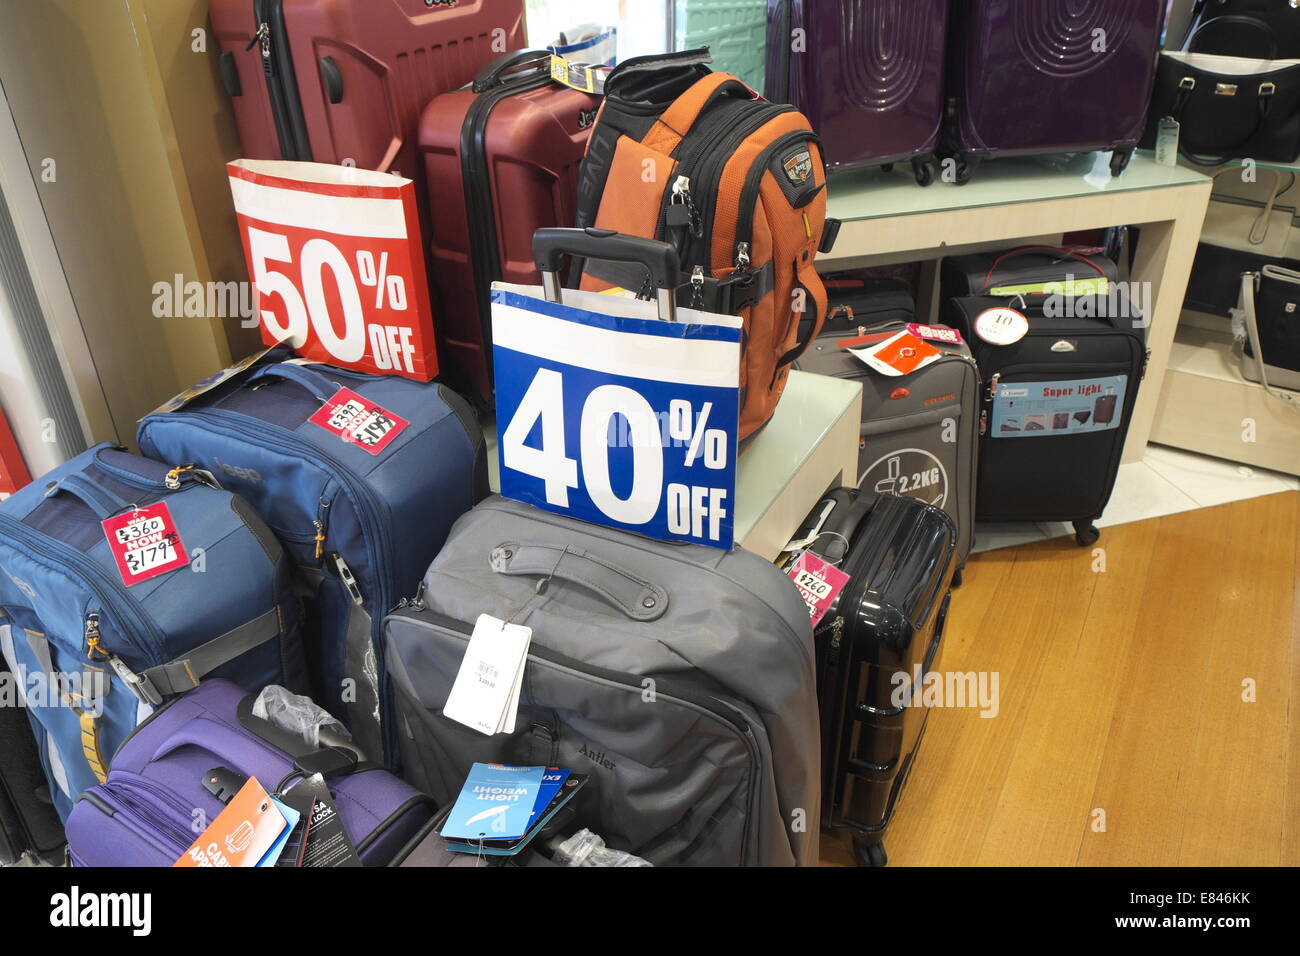 Skybags, VIP Backpacks & Luggage Bags Upto 50% Off